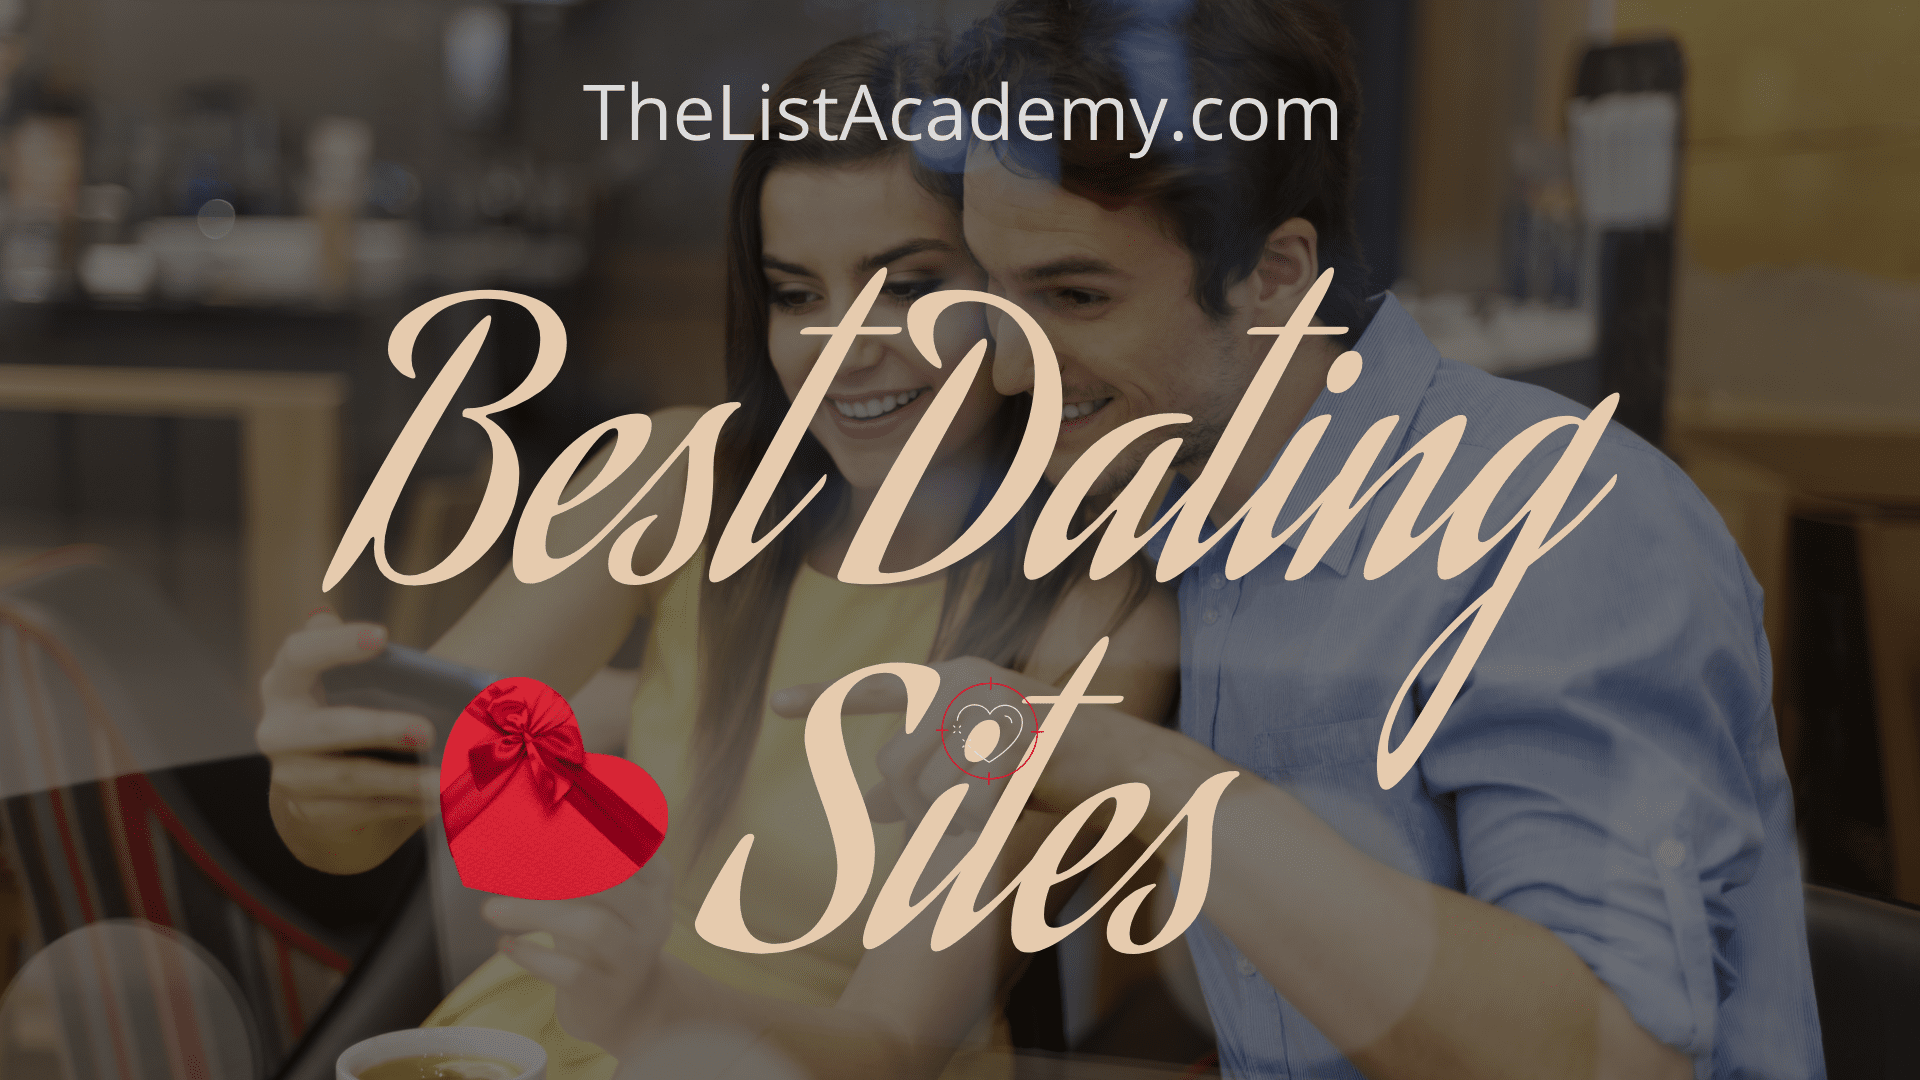 Cover Image For List : 69 Best Dating Sites